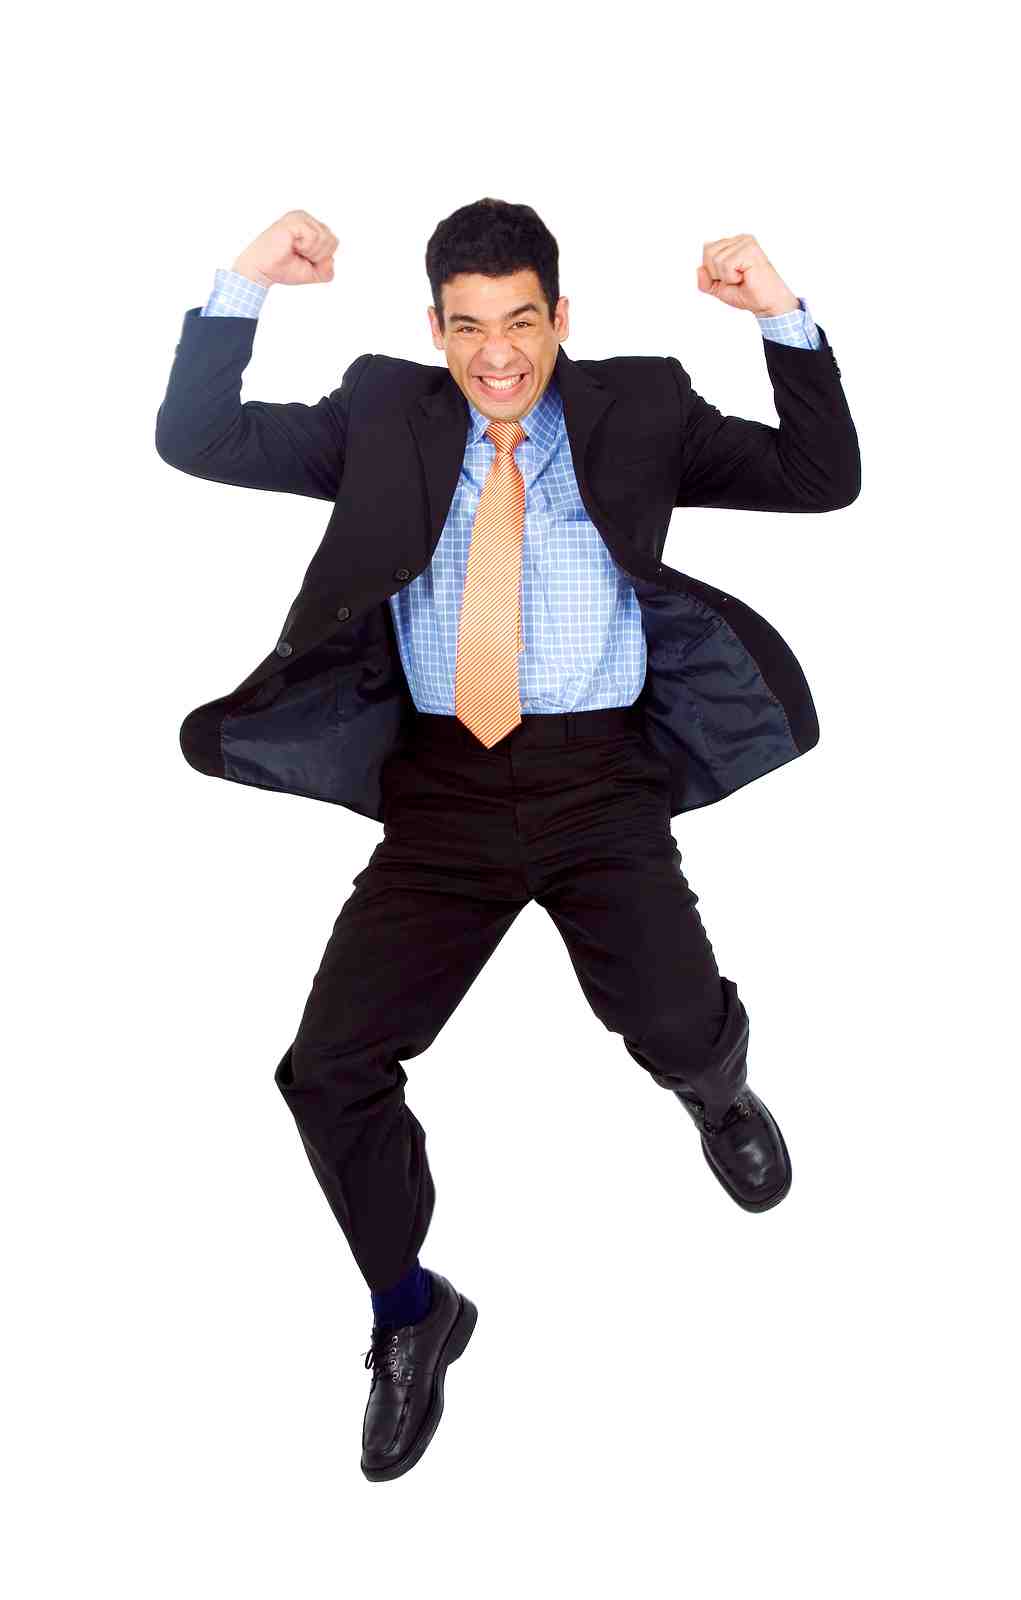 Png Jumping For Joy Hdpng.com 1021 - Jumping For Joy, Transparent background PNG HD thumbnail